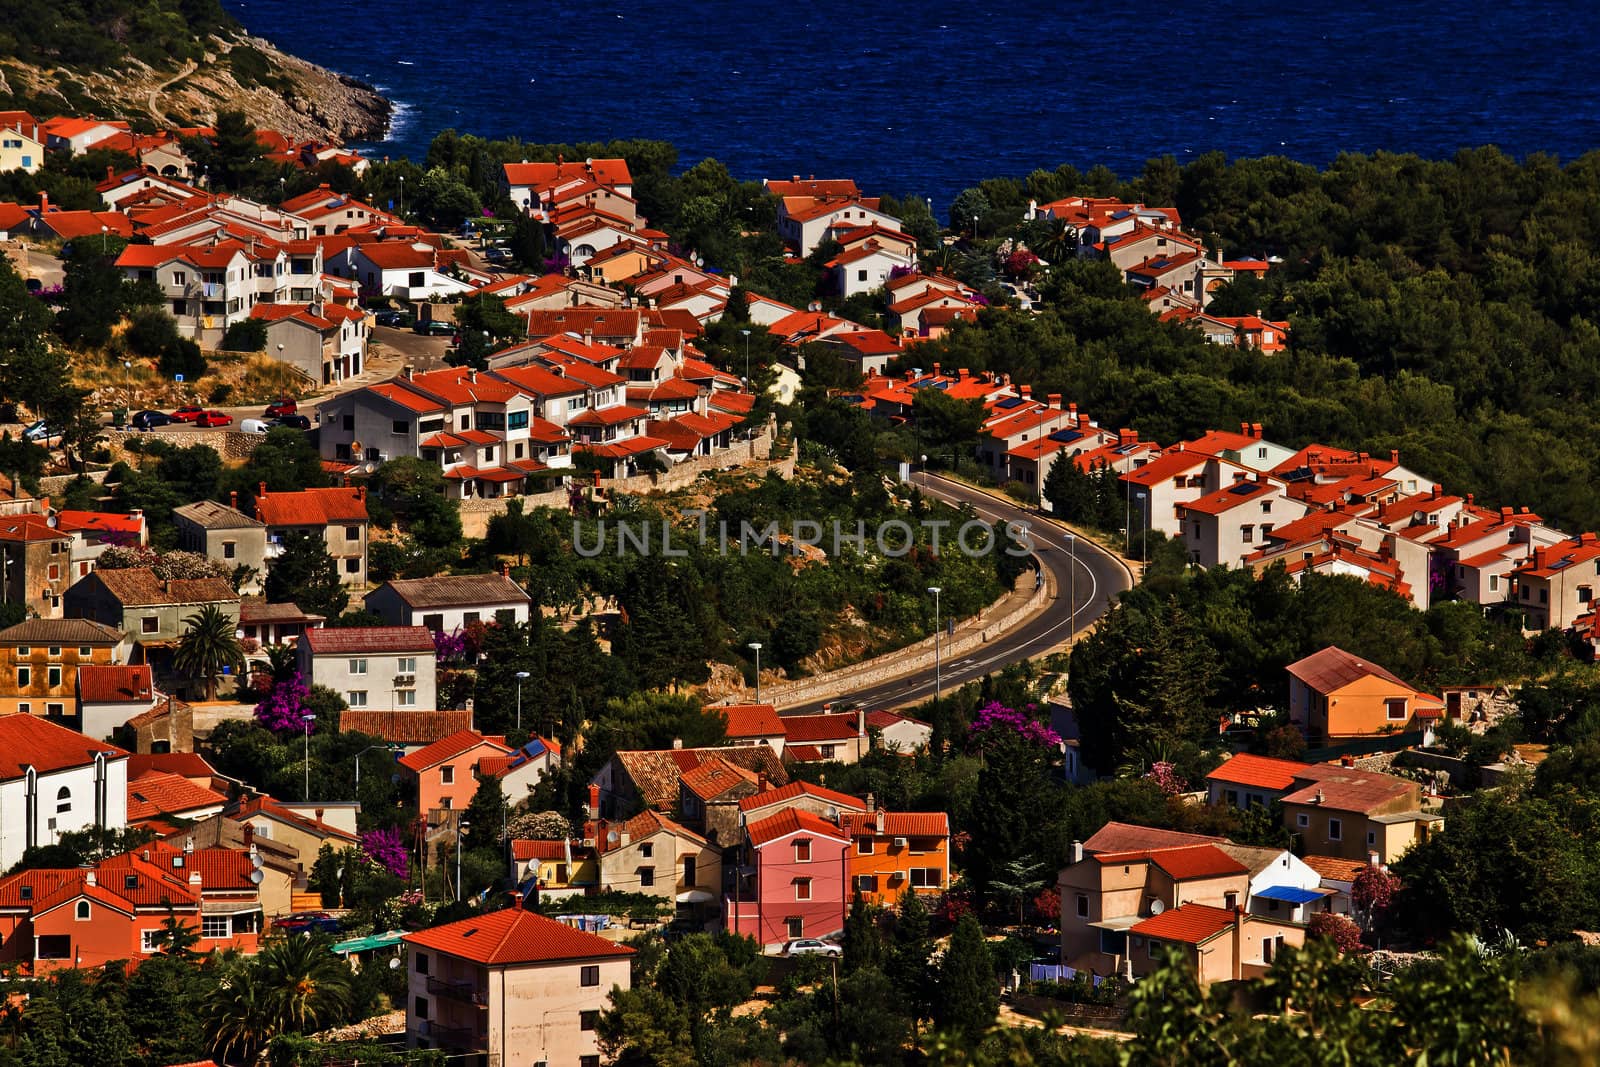 Mediterranean style houses by the sea by xbrchx